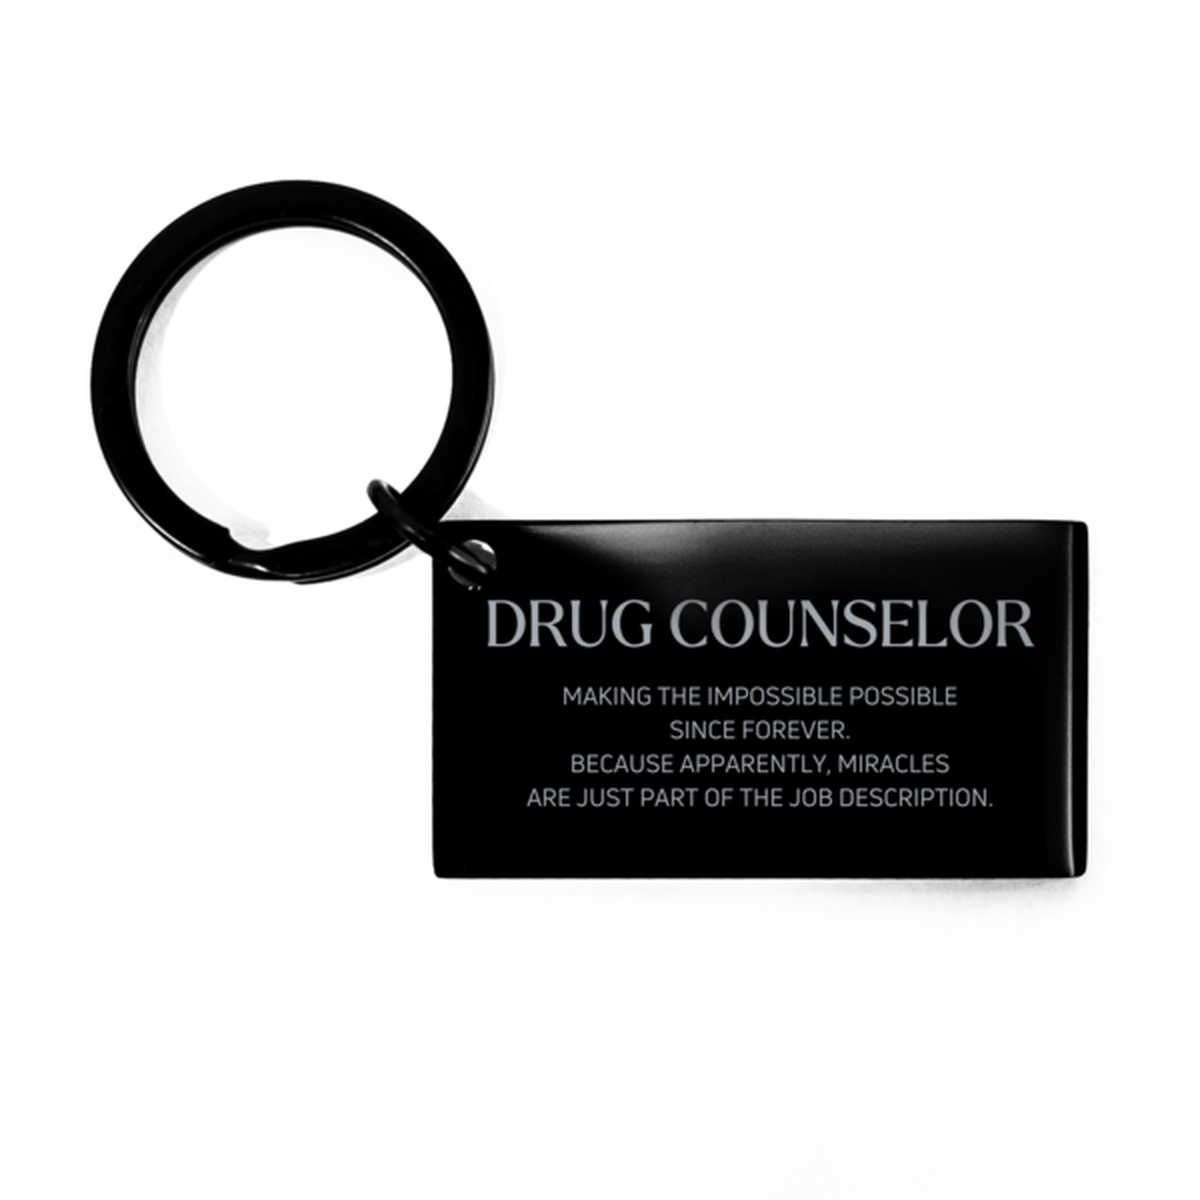 Funny Drug Counselor Gifts, Miracles are just part of the job description, Inspirational Birthday Keychain For Drug Counselor, Men, Women, Coworkers, Friends, Boss